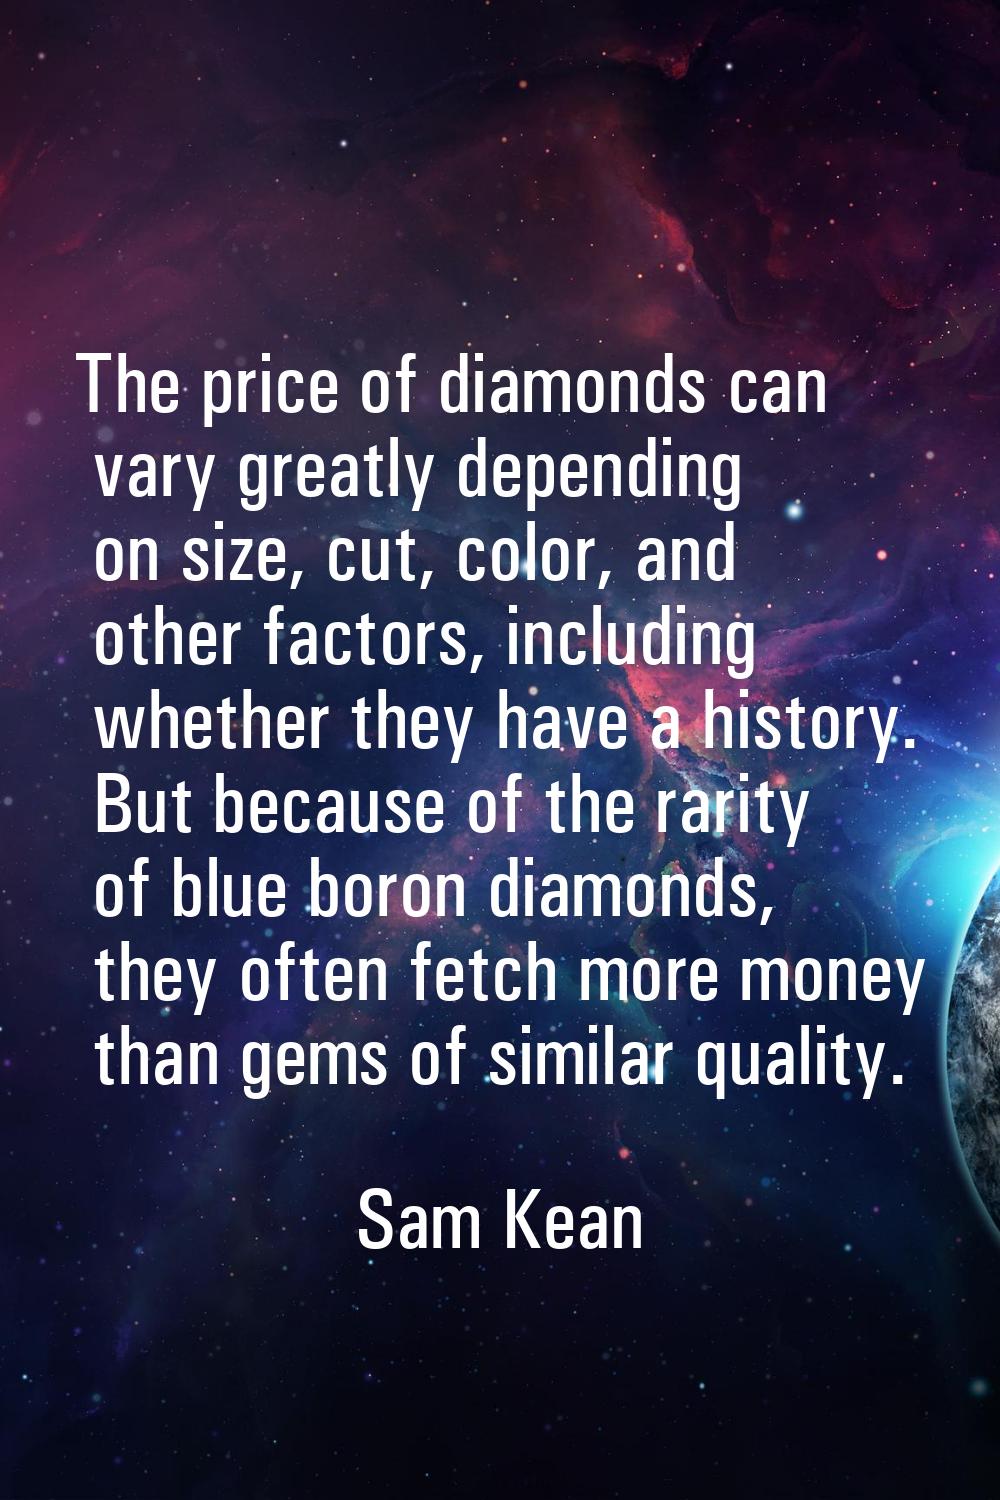 The price of diamonds can vary greatly depending on size, cut, color, and other factors, including 